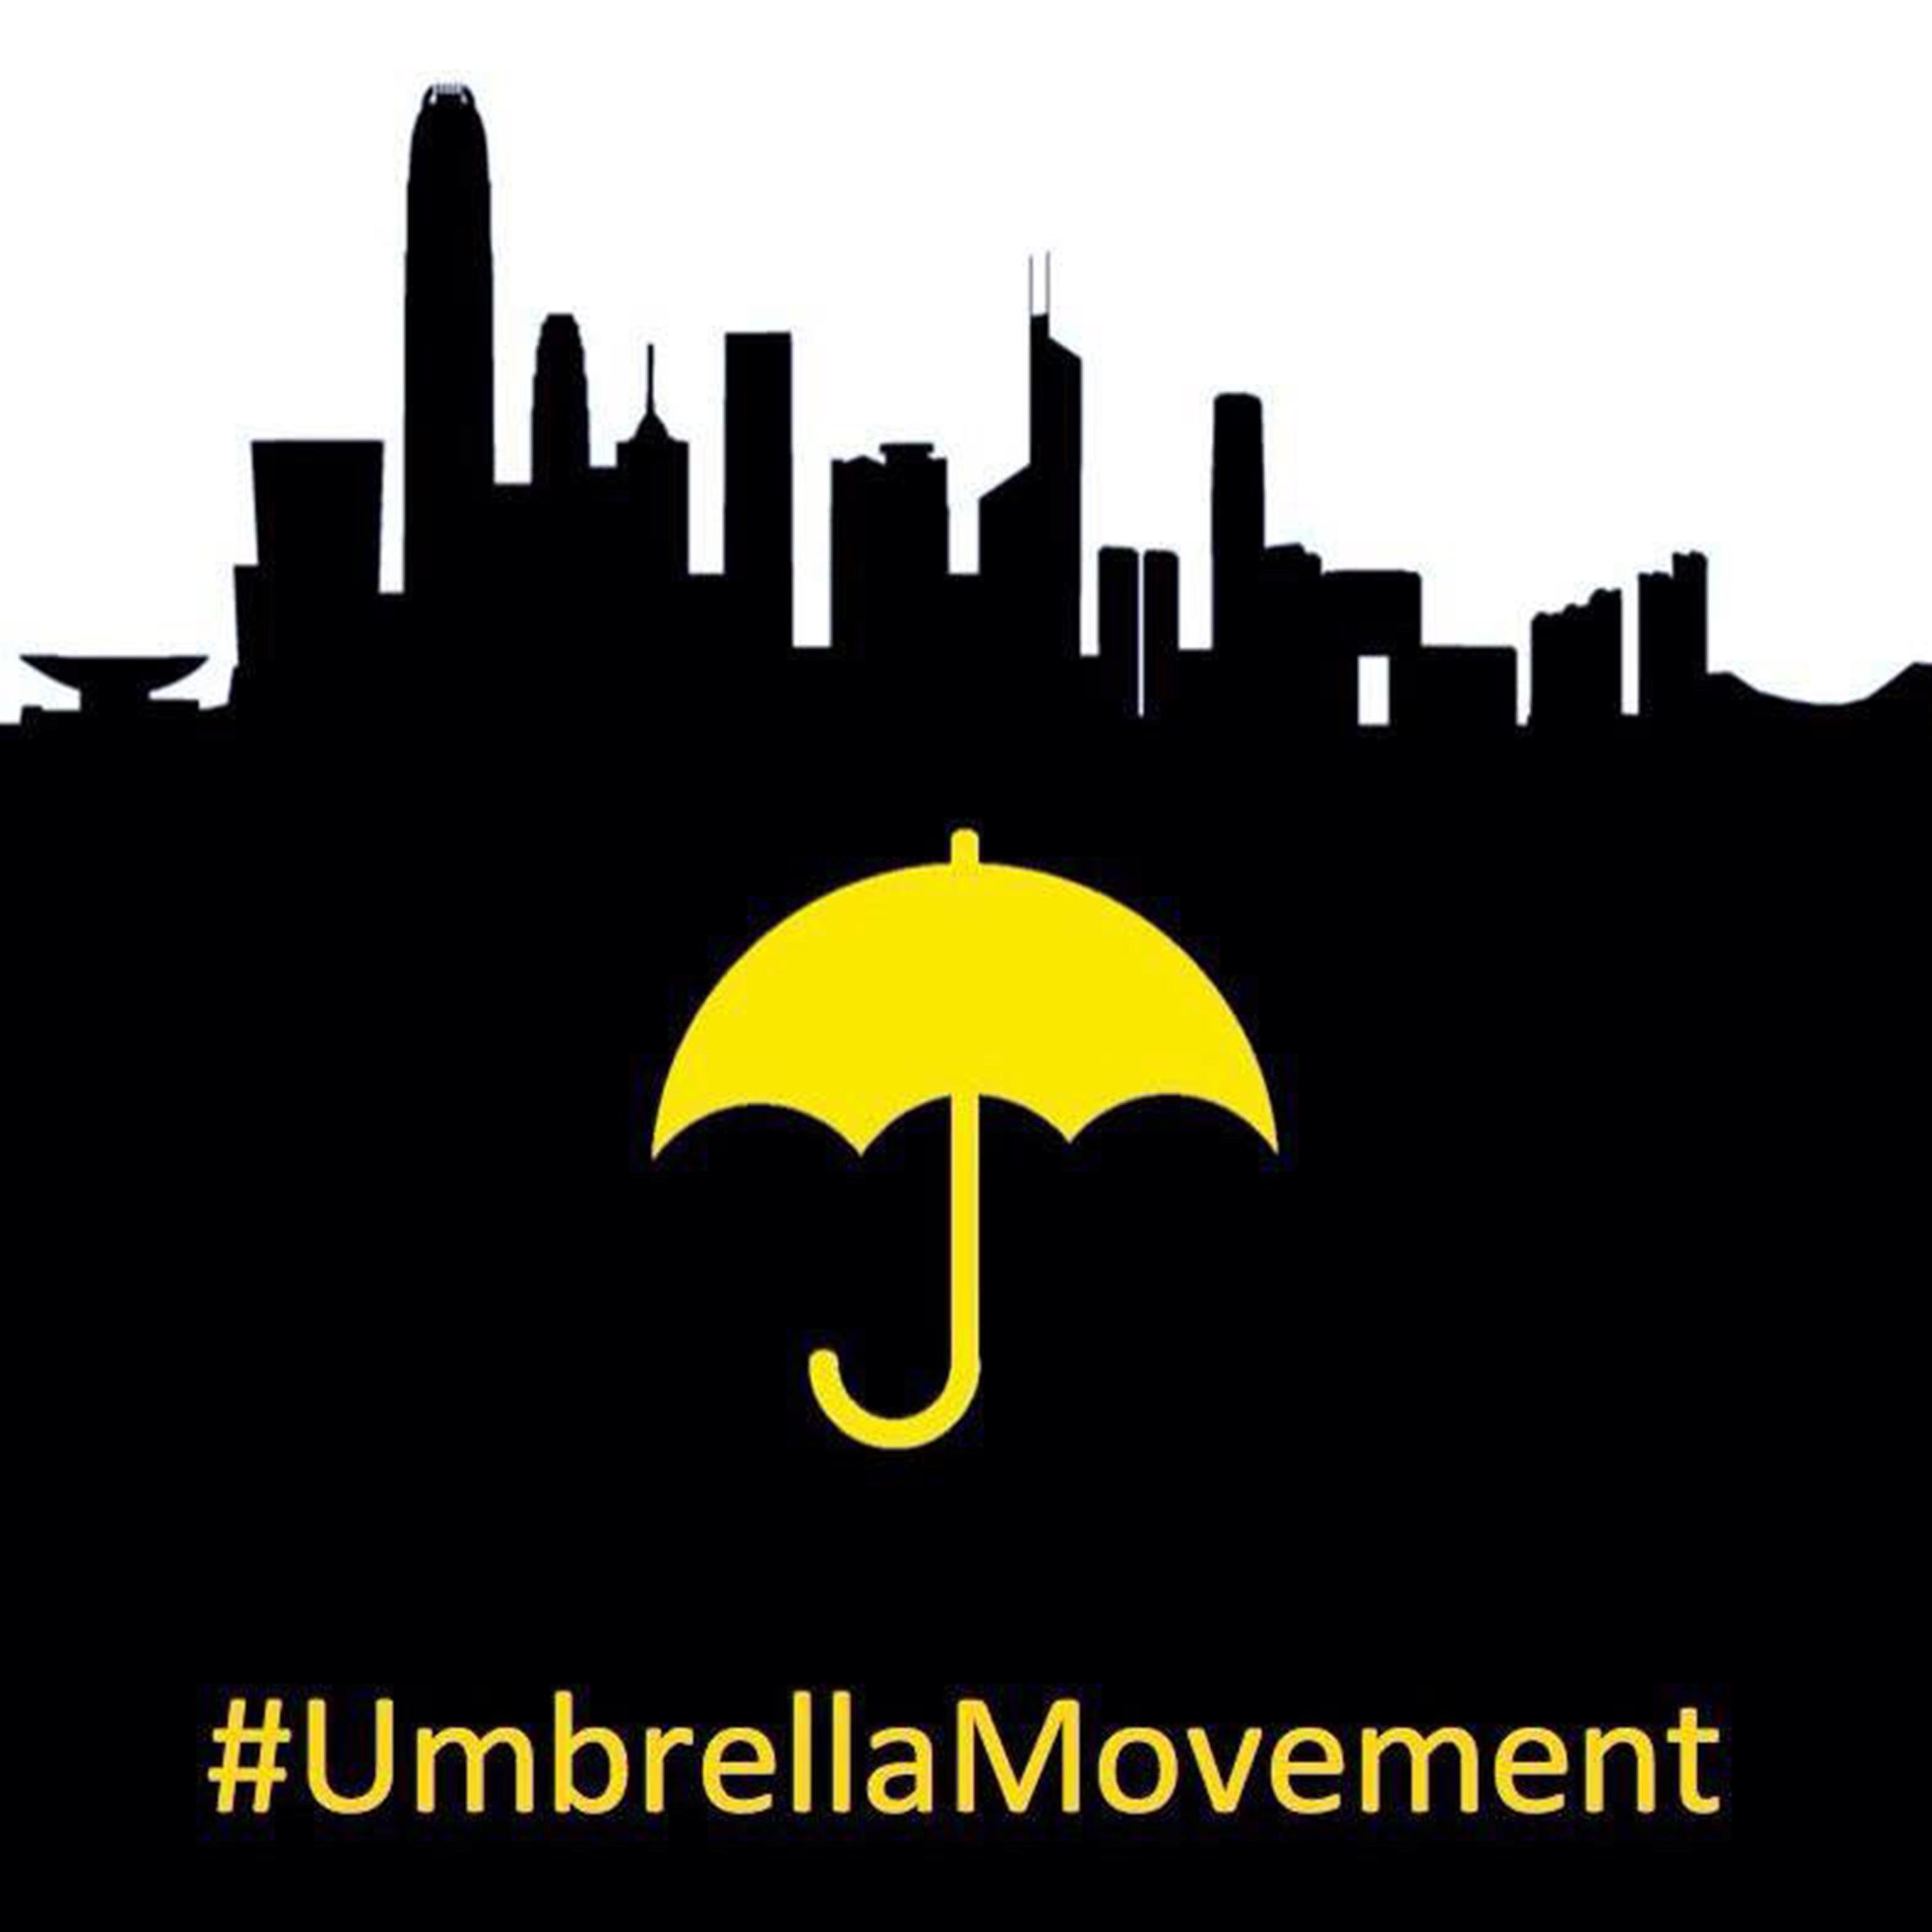 #UmbrellaMovement meme displaying the black silhouette of the Hong Kong skyline on a white background. In the center is a yellow umbrella with the words “#UmbrellaMovement” under it.